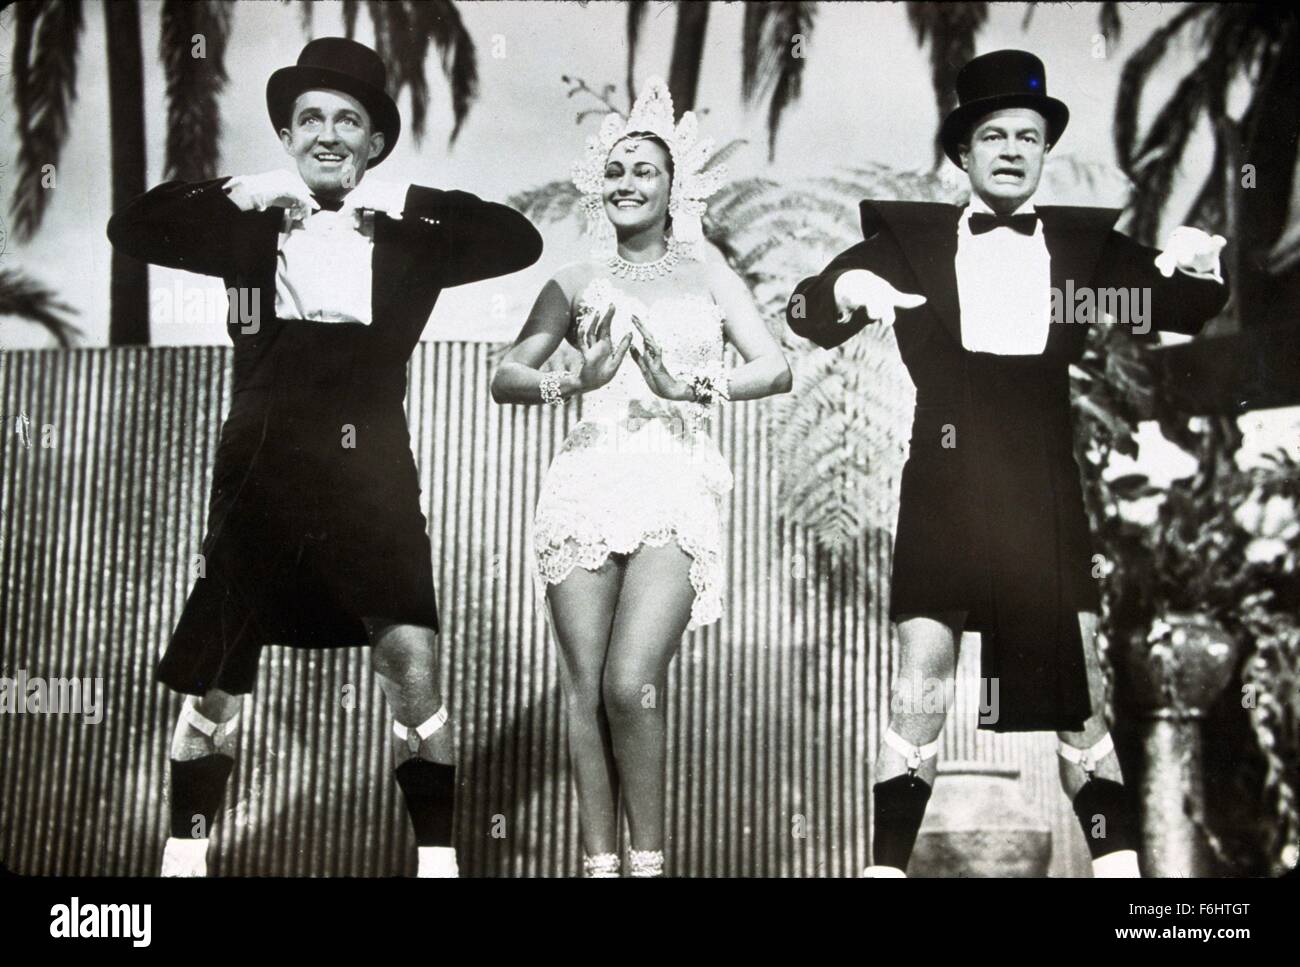 1952, Film Title: ROAD TO BALI, Director: HAL WALKER, Studio: PARAMOUNT, Pictured: BING CROSBY, BOB HOPE, DOROTHY LAMOUR. (Credit Image: SNAP) Stock Photo